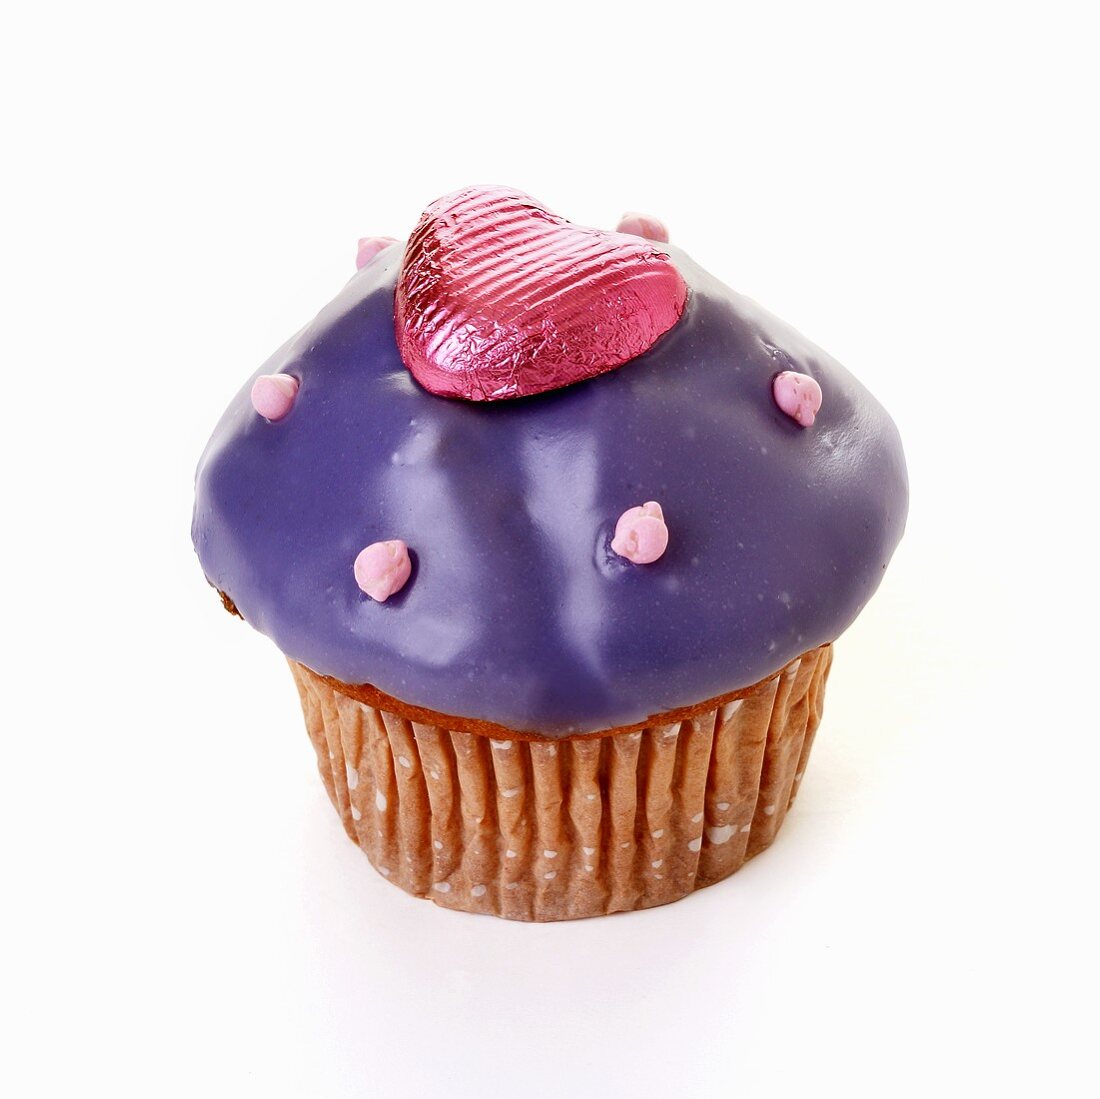 Muffin with purple icing and chocolate heart